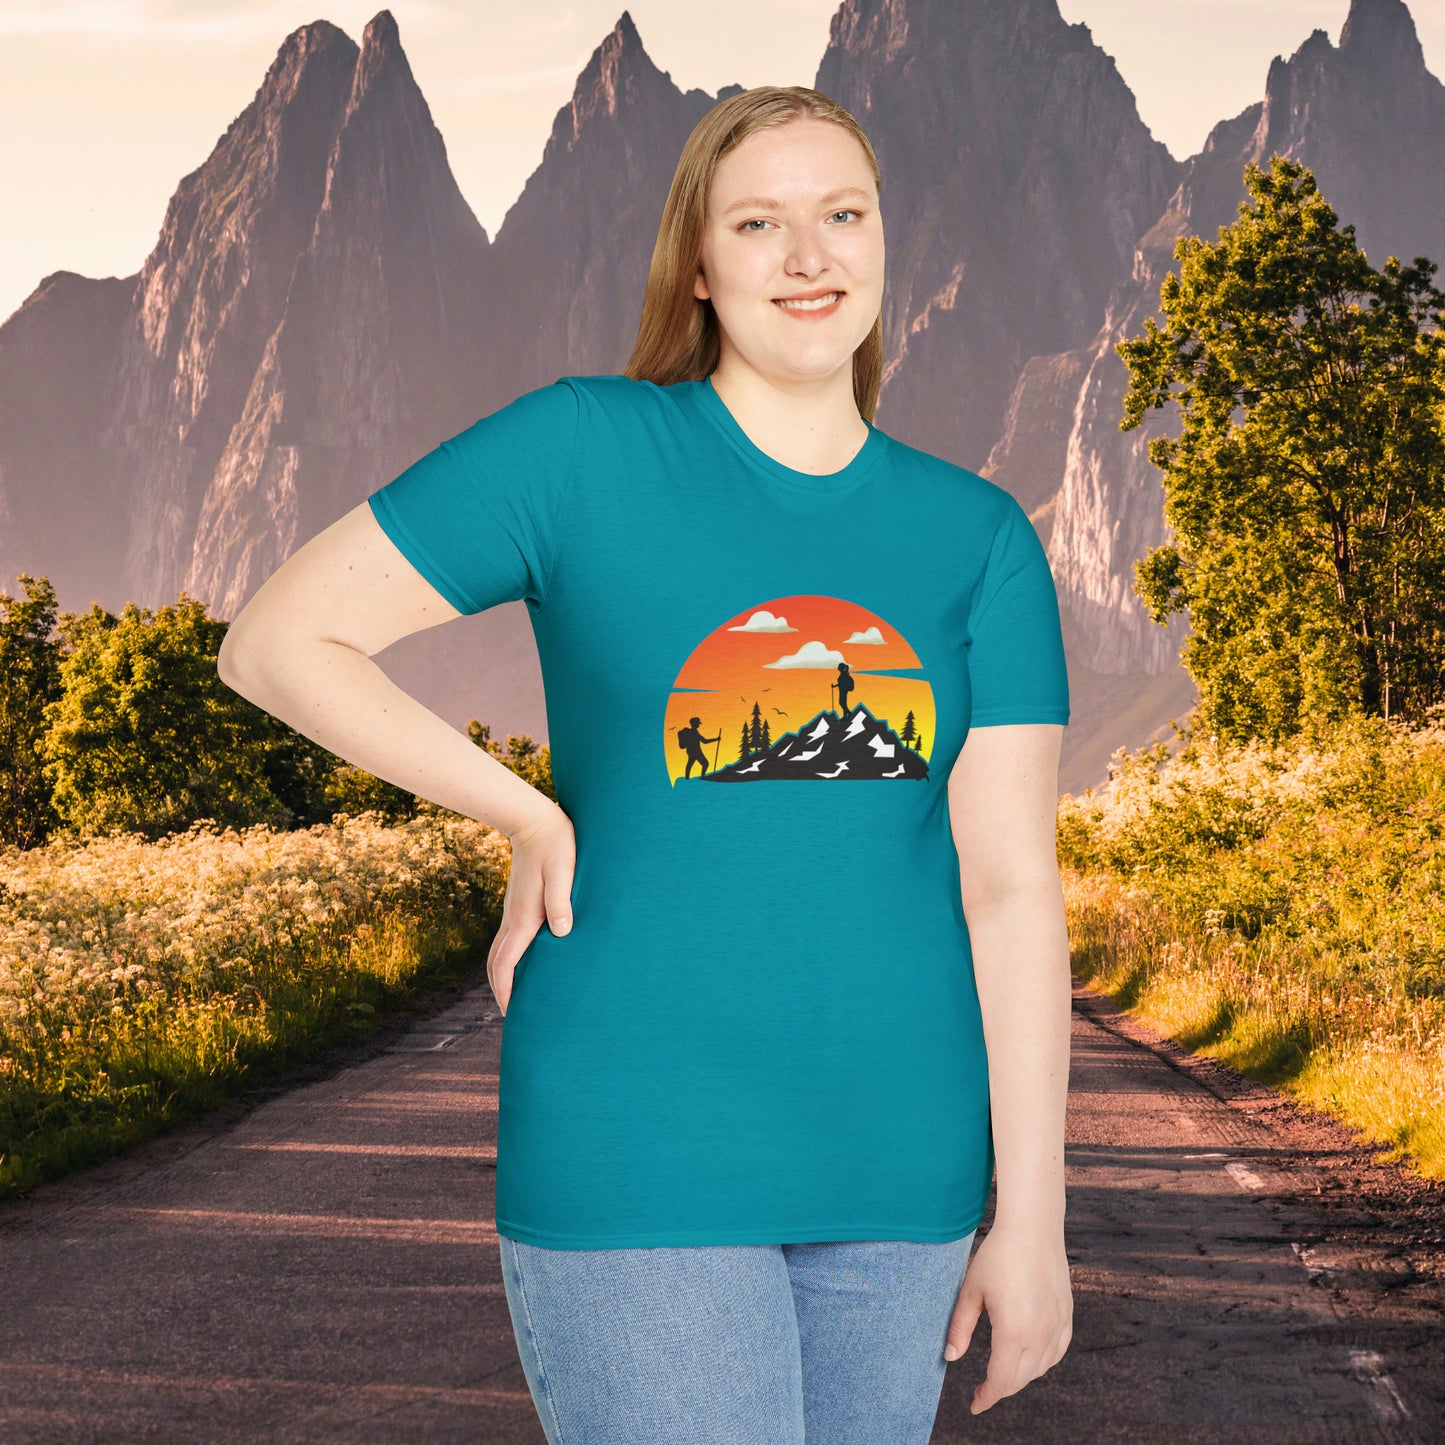 Great shirt for that hiker who just loves to be outdoors to climb mountains or be one with nature on this Unisex Softstyle T-Shirt.